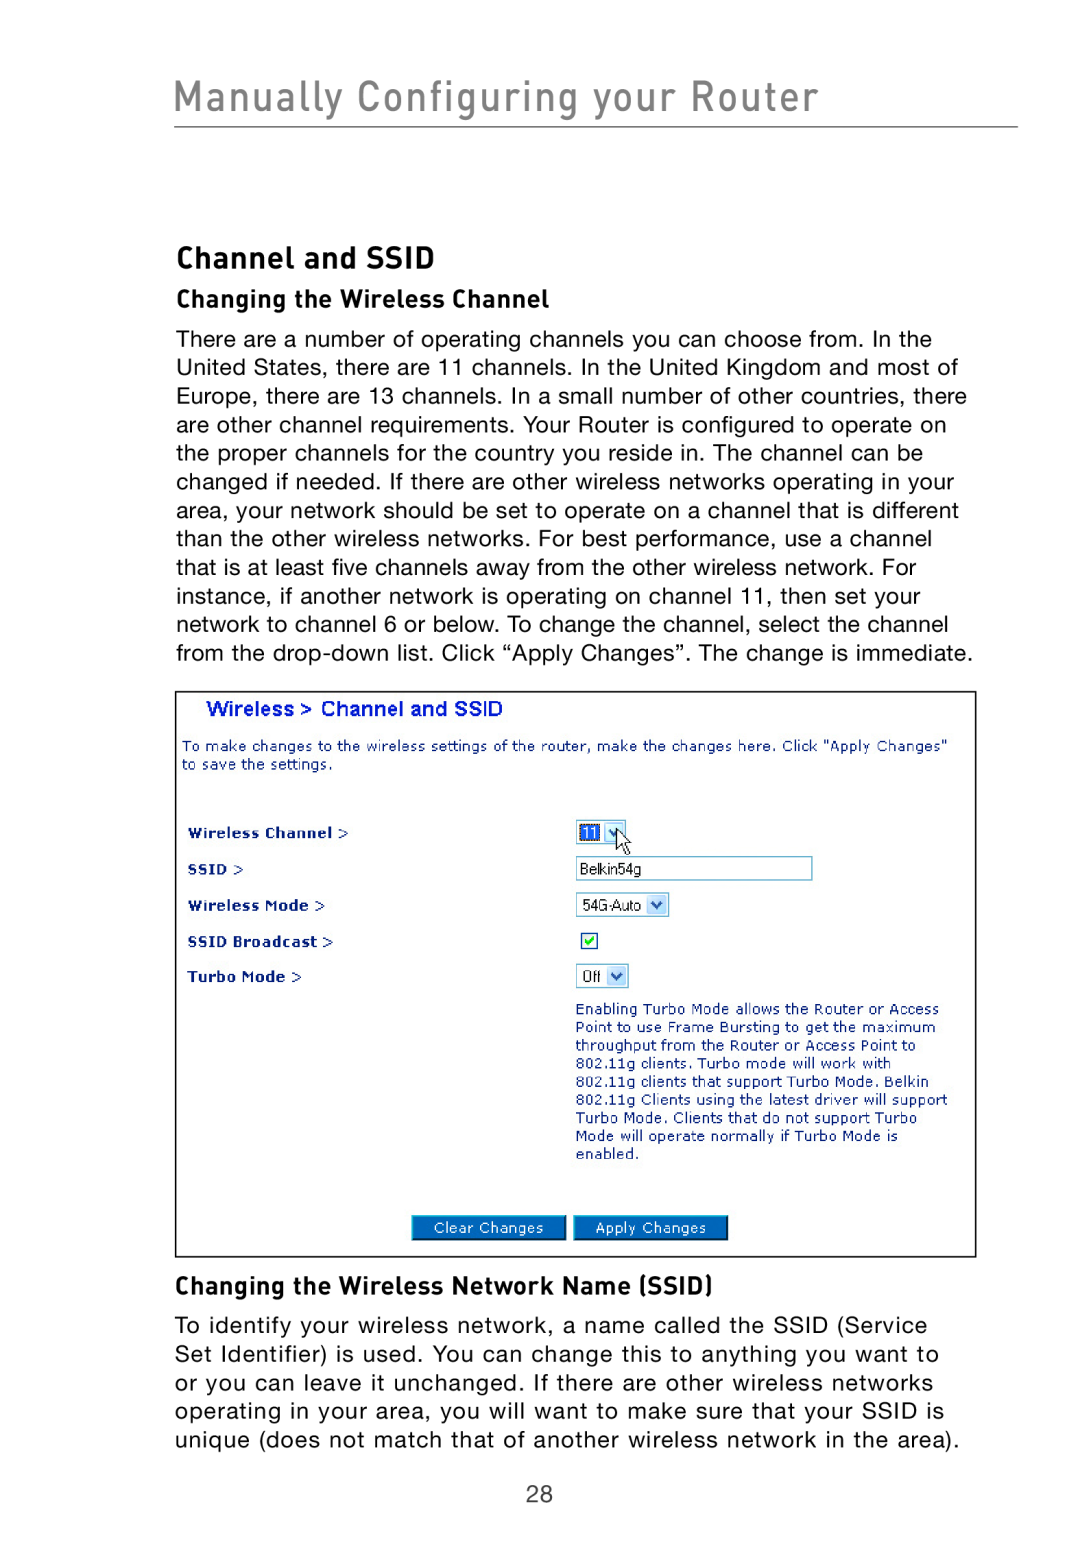 Belkin F5D7632UK4 user manual Channel and SSID, Changing the Wireless Channel, Changing the Wireless Network Name SSID 